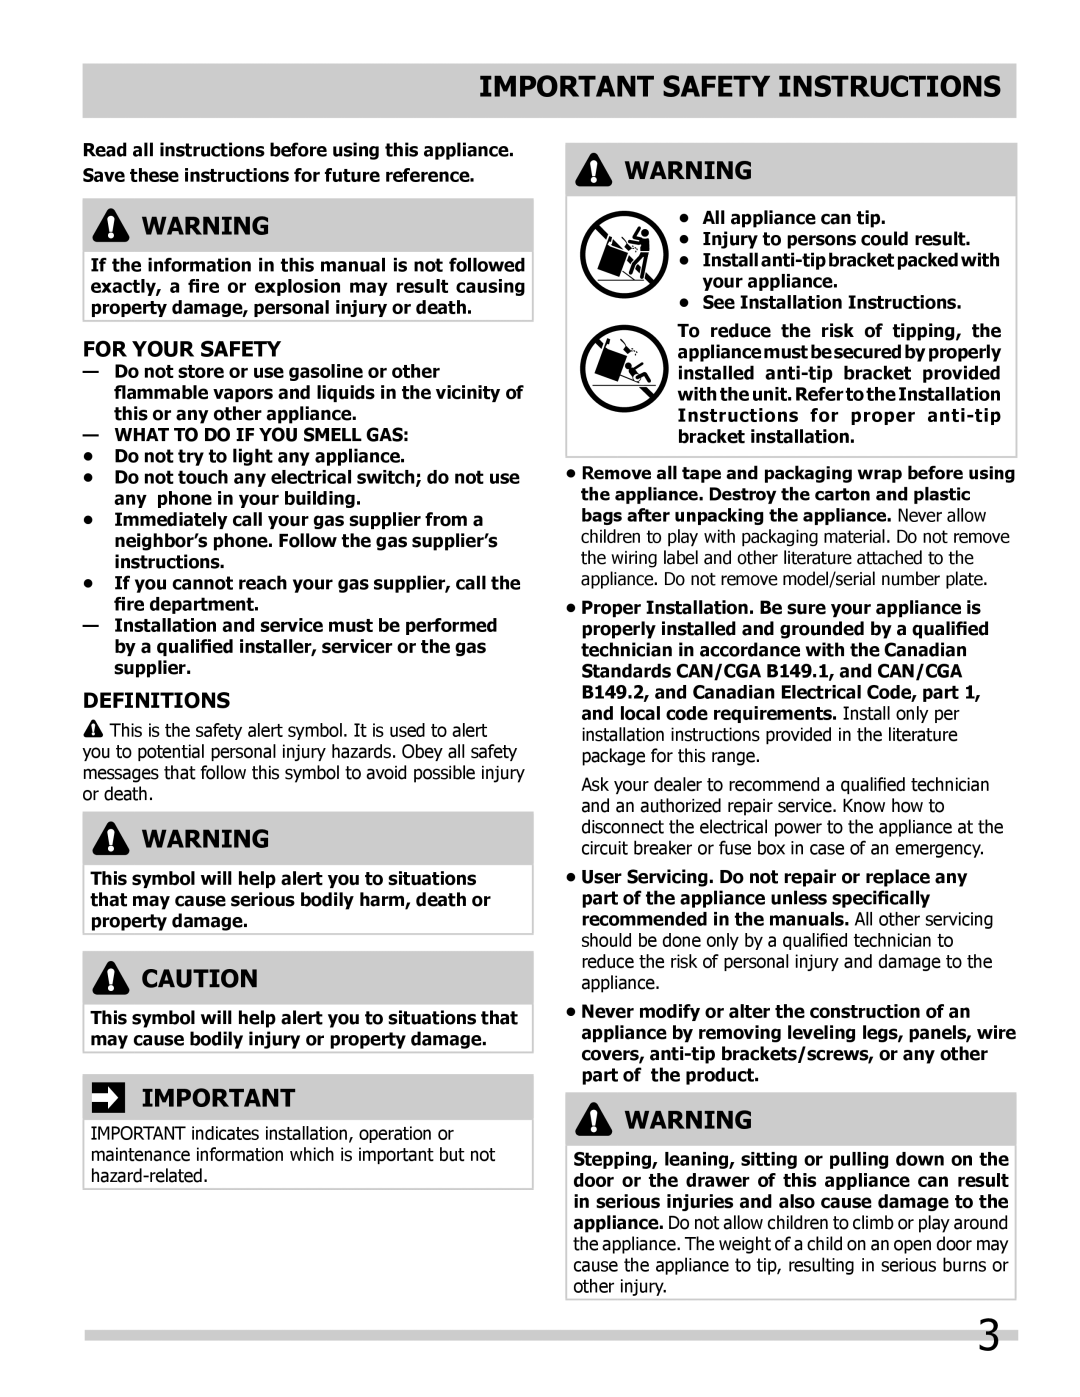 Frigidaire 318205854 manual Important Safety Instructions, For Your Safety, Definitions, See Installation Instructions 